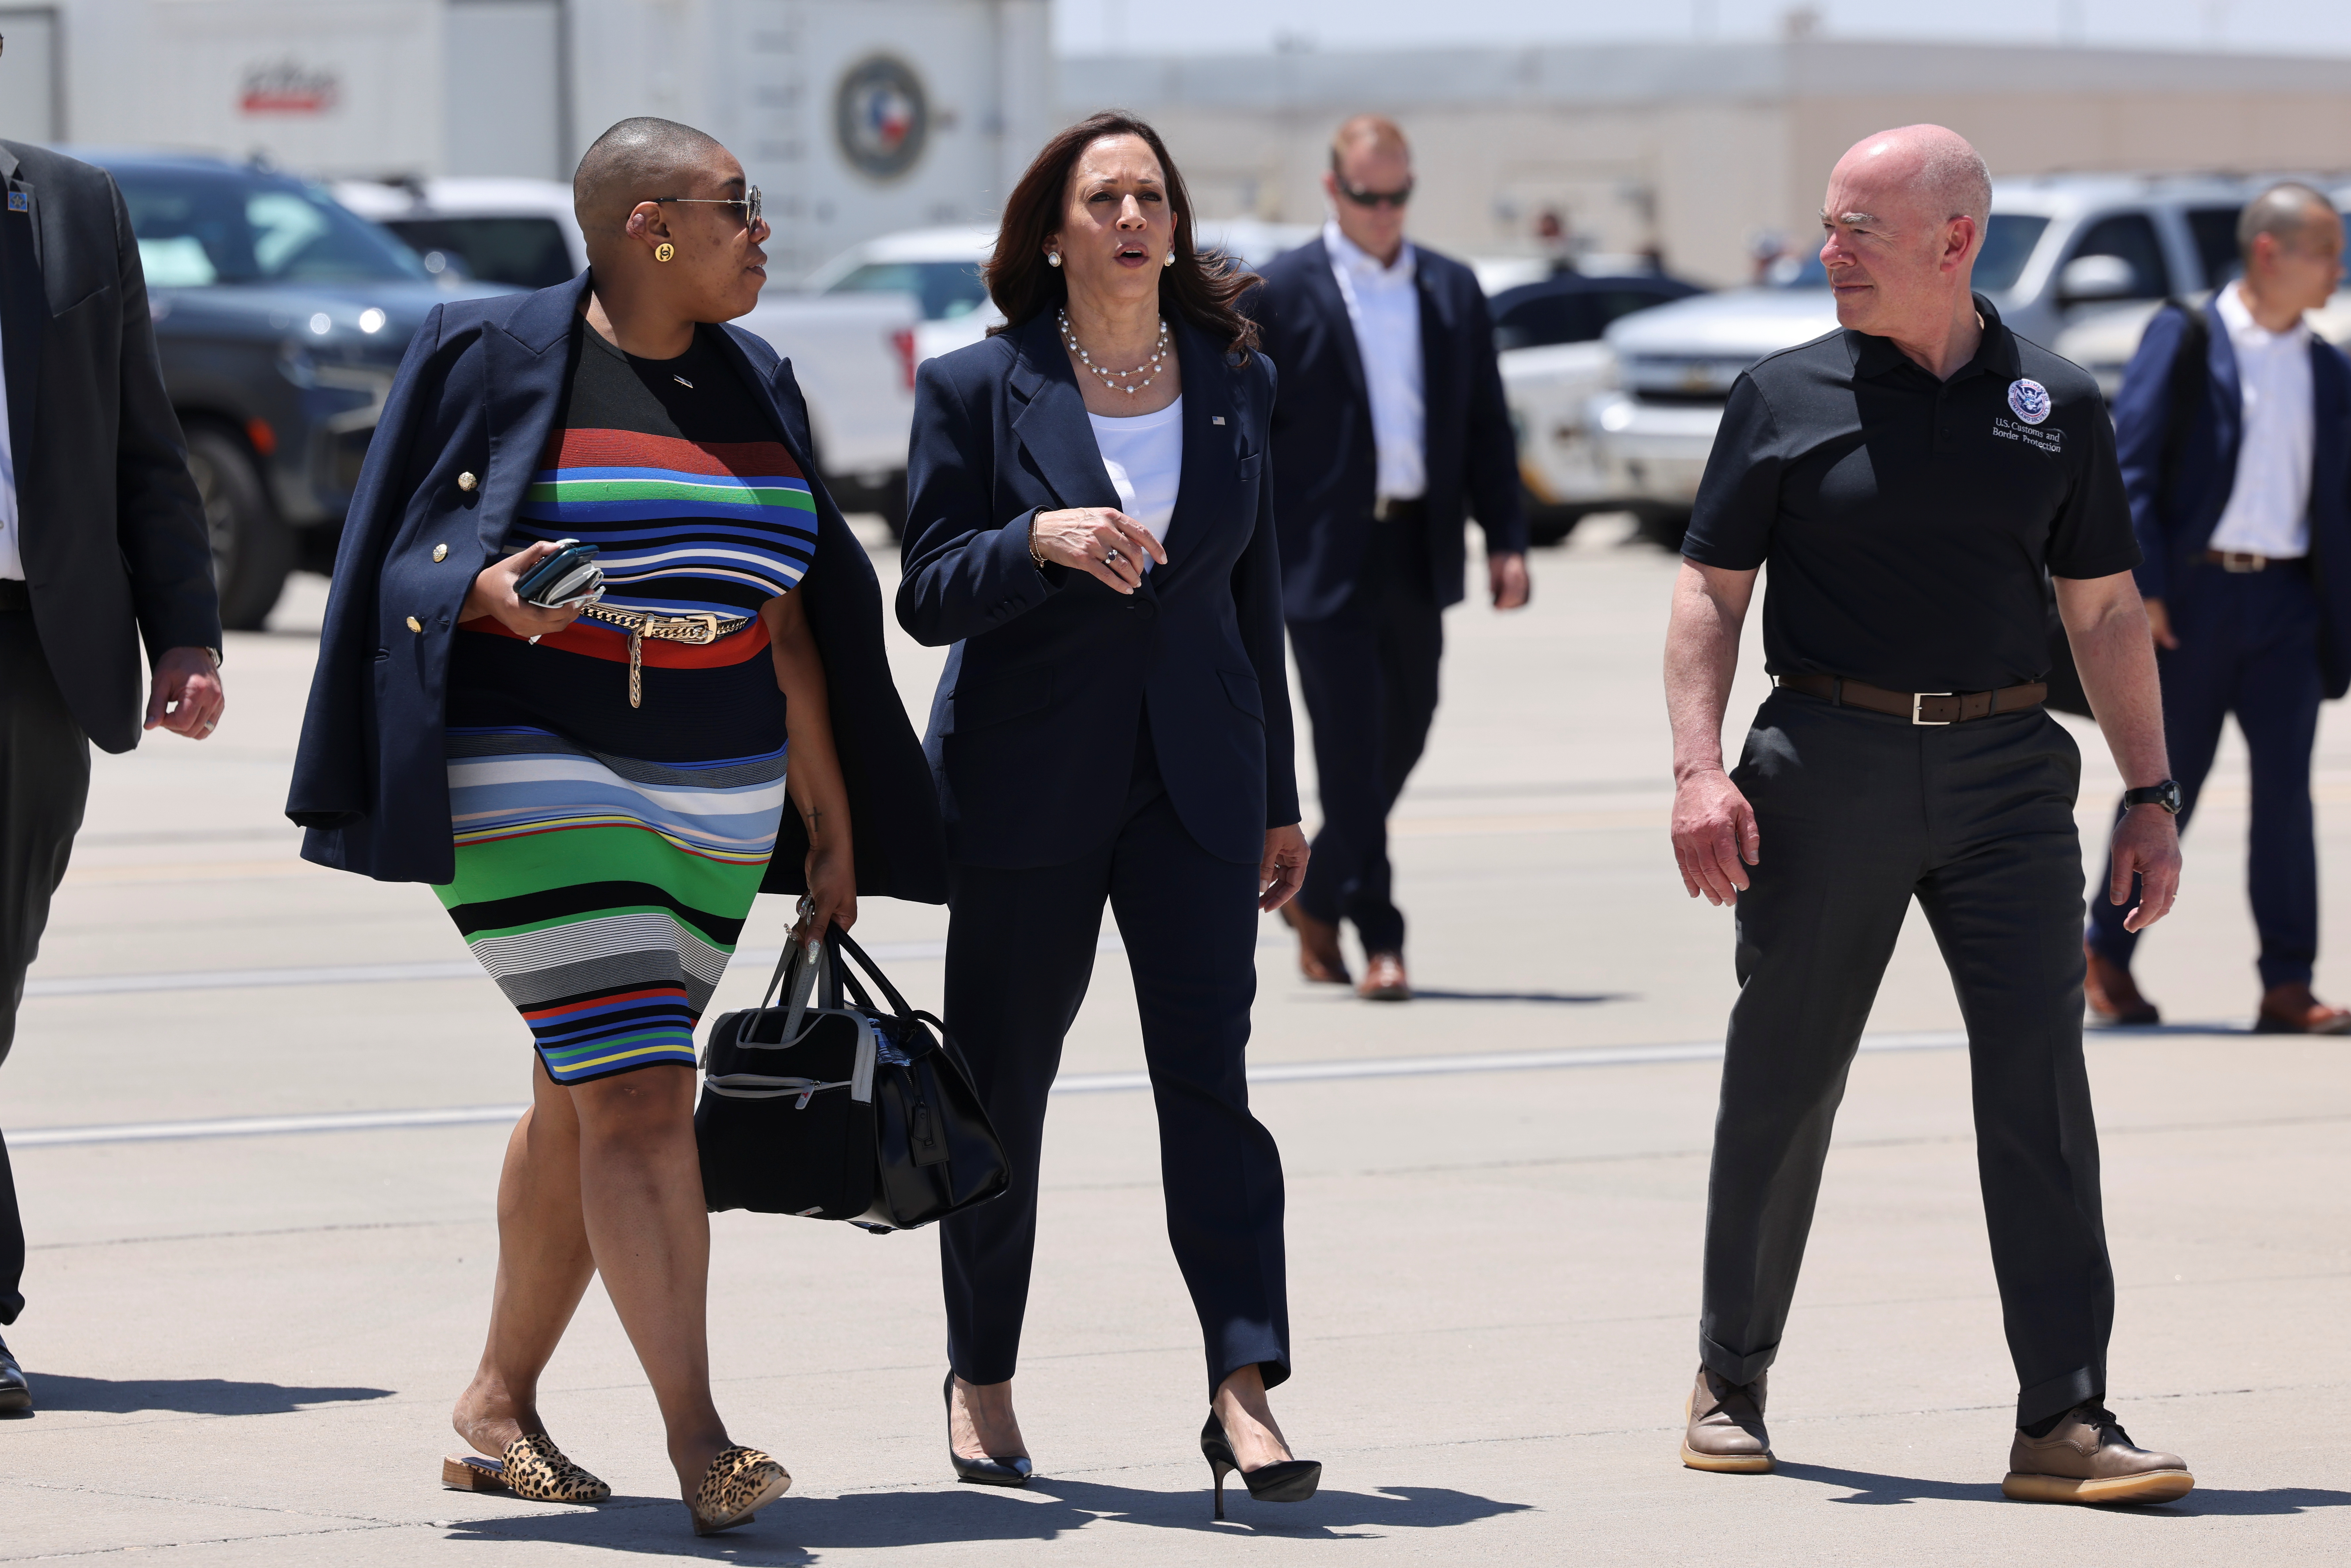 U.S. Vice President Kamala Harris walks with Department of Homeland Security (DHS) Secretary Alejandro Mayorkas and Spokesperson Symone Sanders to board Air Force Two at El Paso International Airport in El Paso, Texas, U.S., June 25, 2021. REUTERS/Evelyn Hockstein